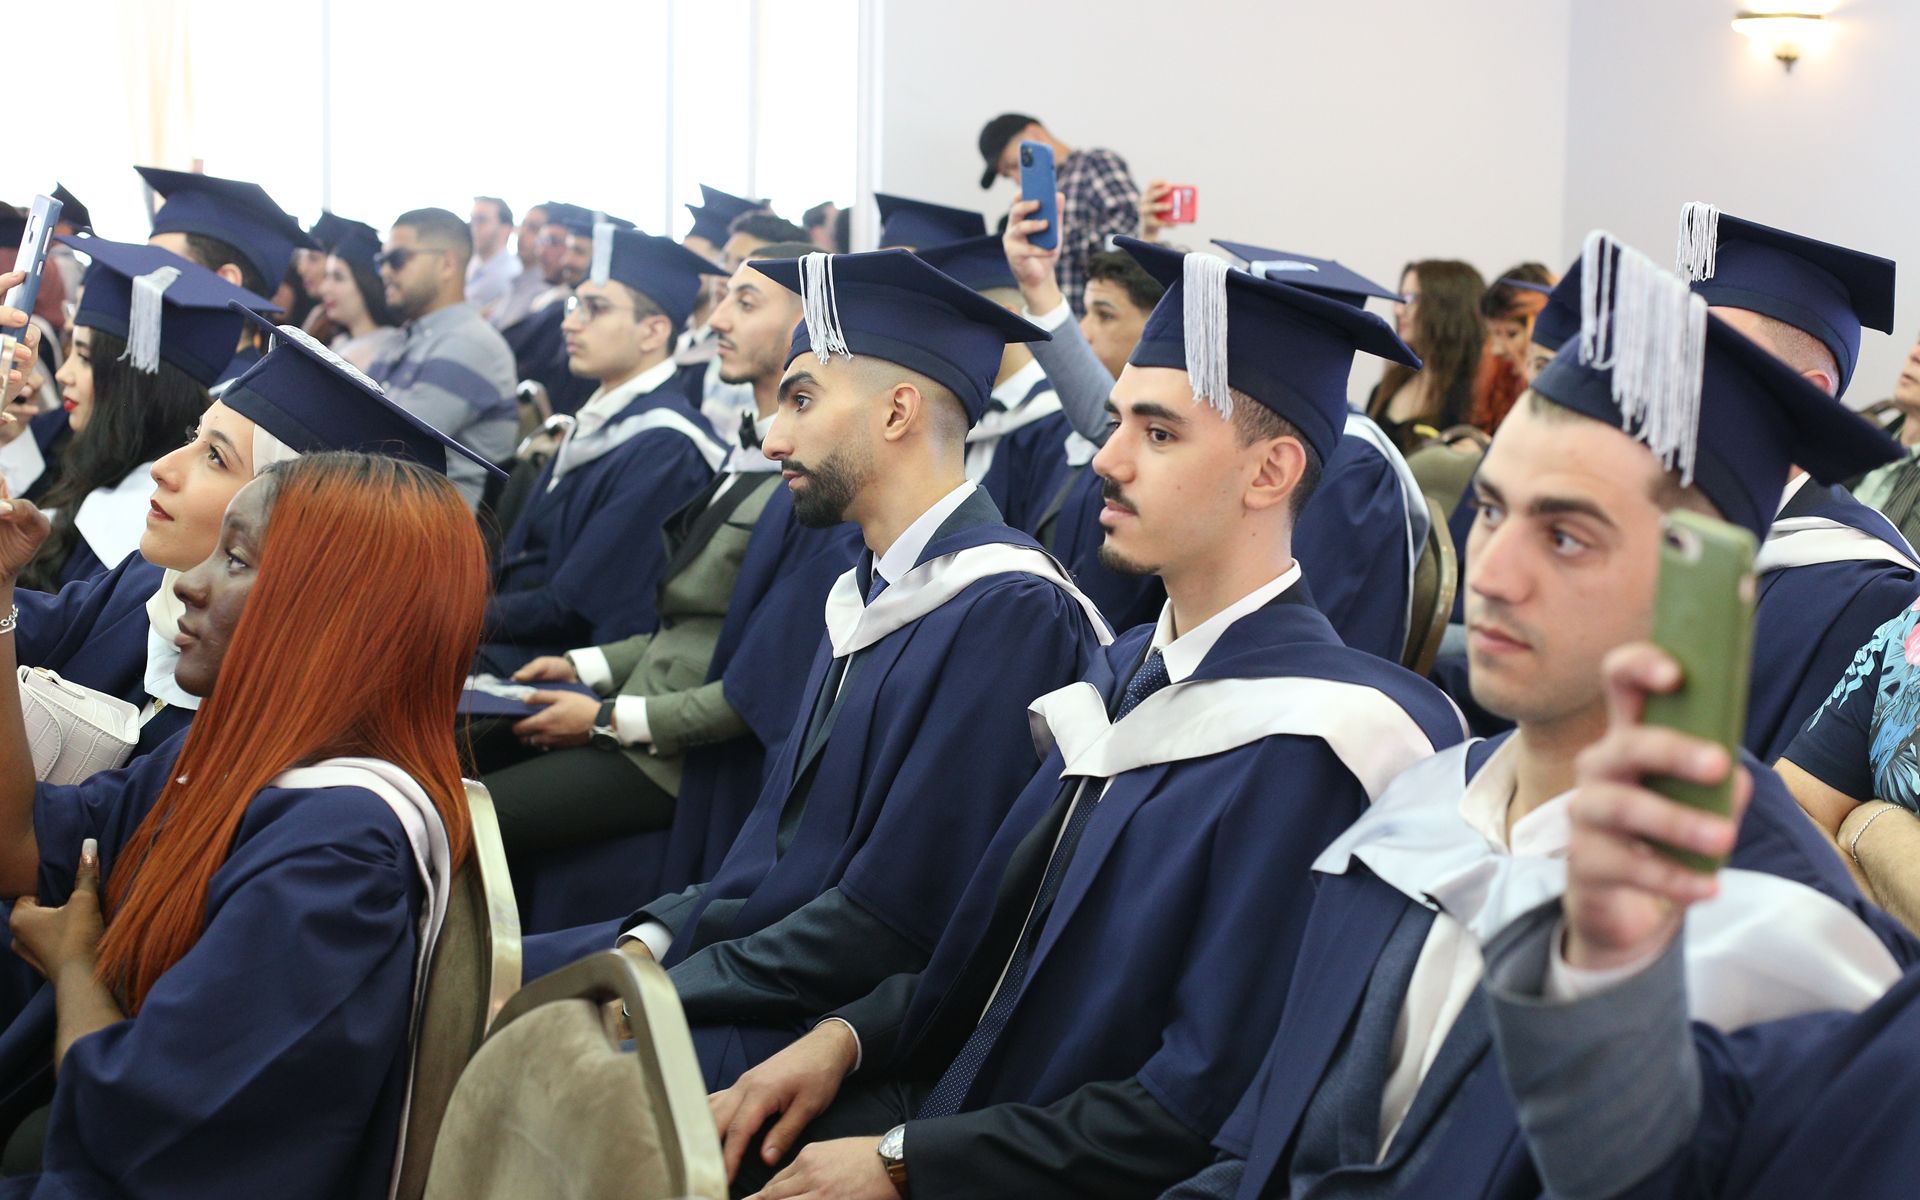 Graduates were congratulated by the rector of Saint Petersburg State Chemical Pharmaceutical University, Igor Narkevich, General Director of RACUS Organization, Avbakar Nutsalov and the university professors.